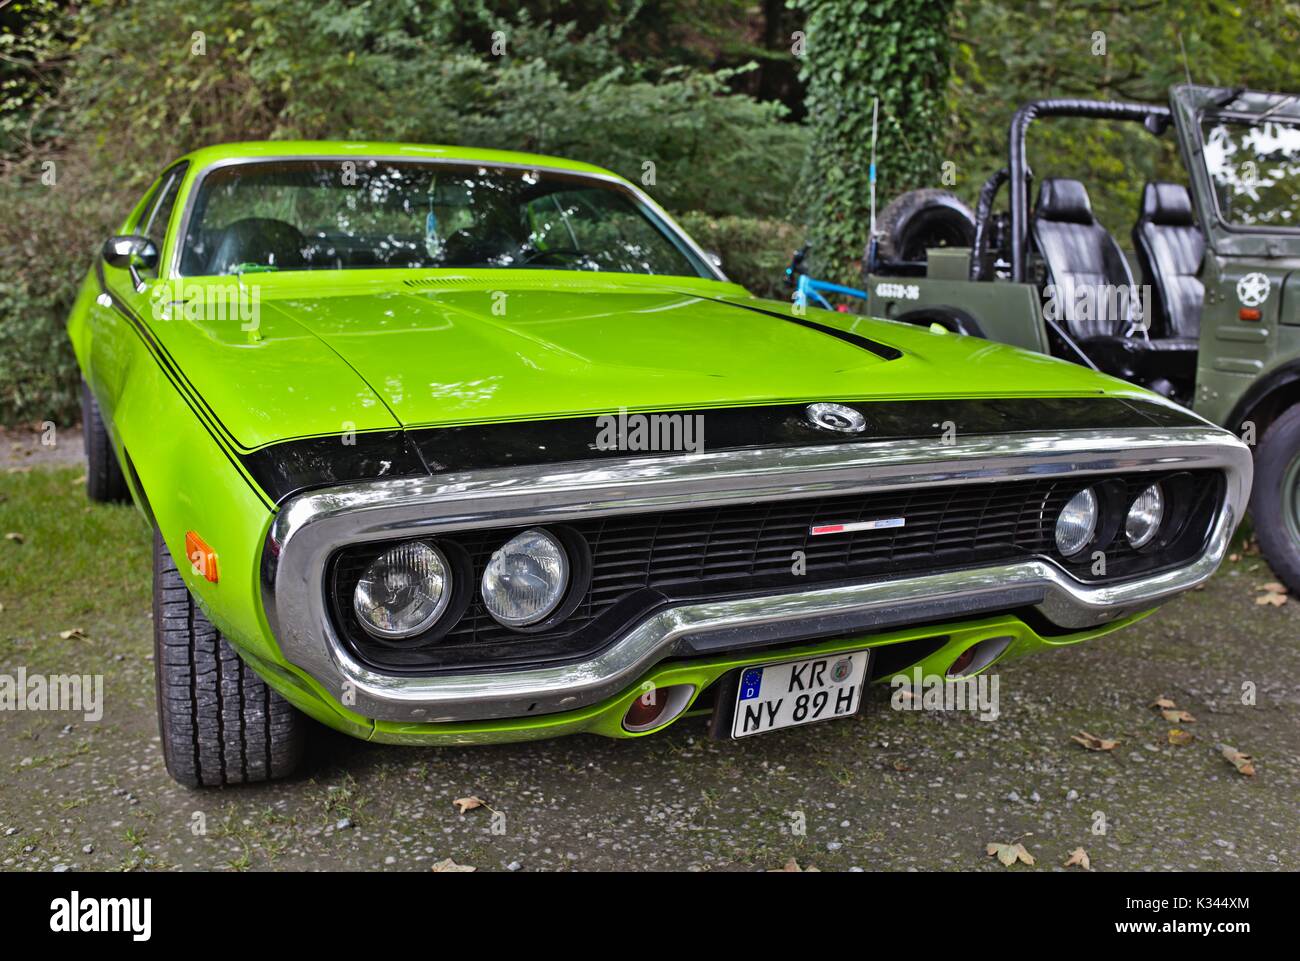 Plymouth GTX, Small vintage car show, Germany Stock Photo